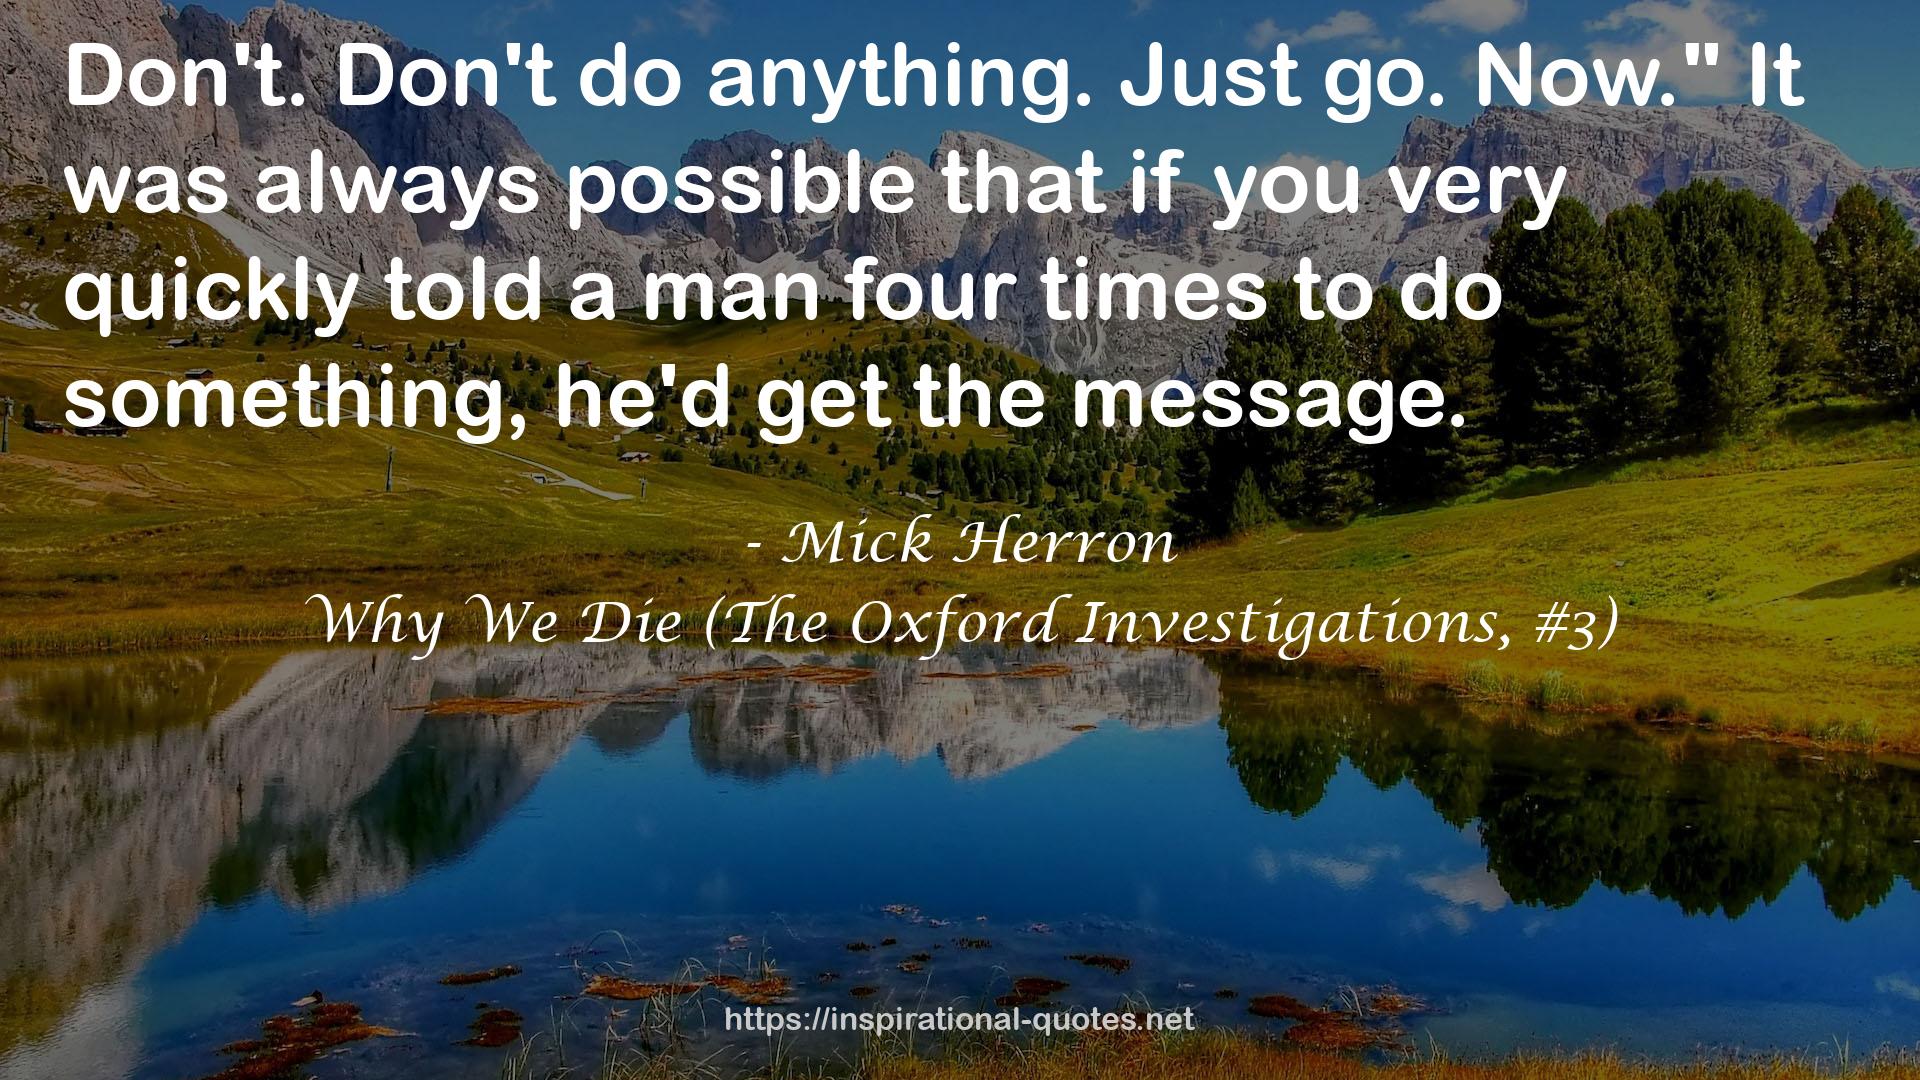 Why We Die (The Oxford Investigations, #3) QUOTES